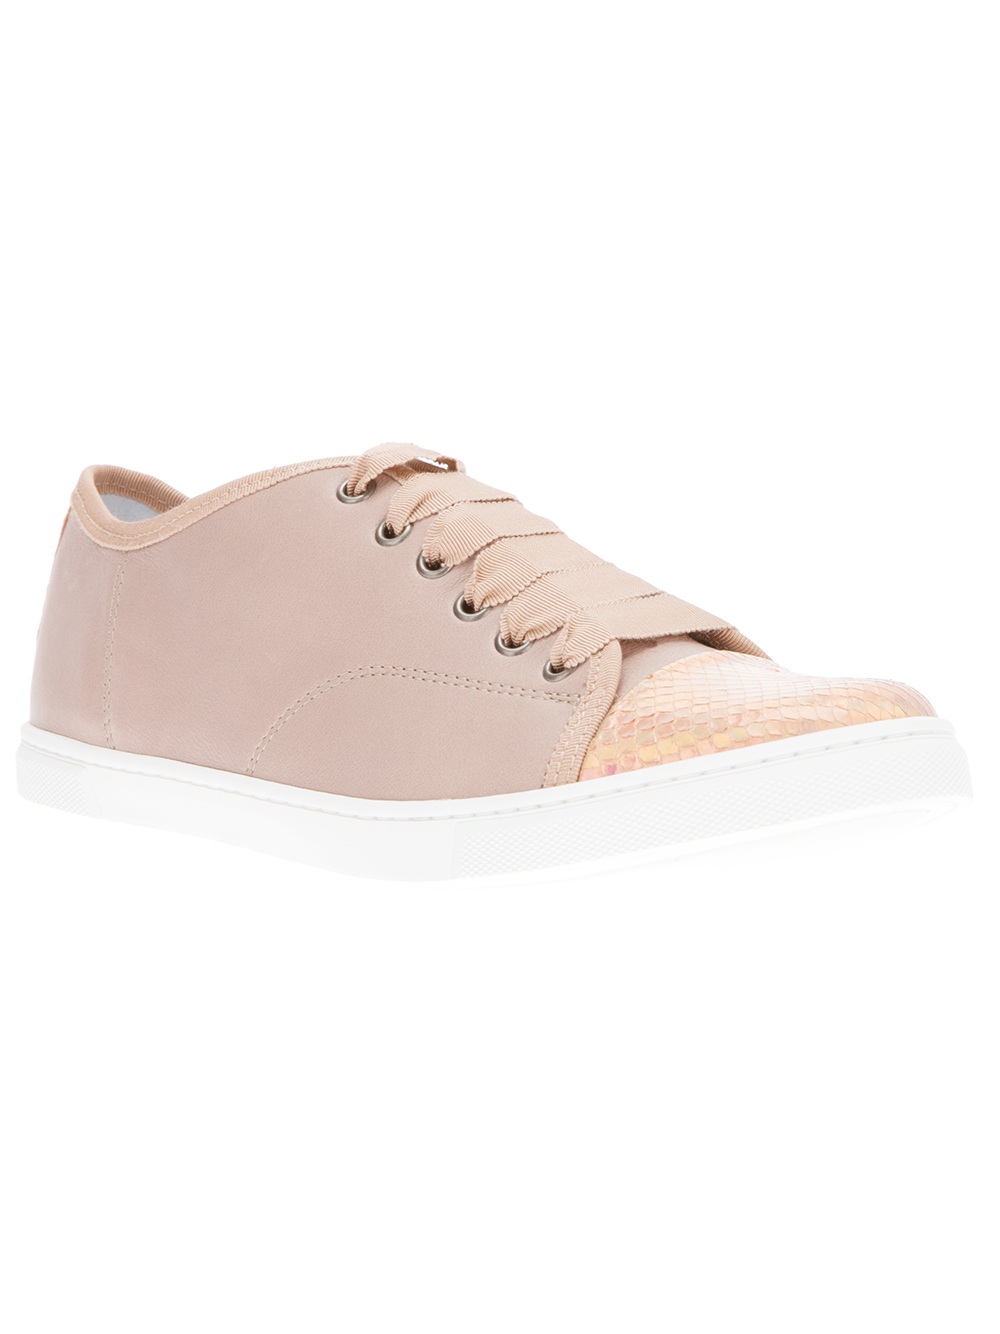 Lanvin Lace Up Trainer in Pink | Lyst